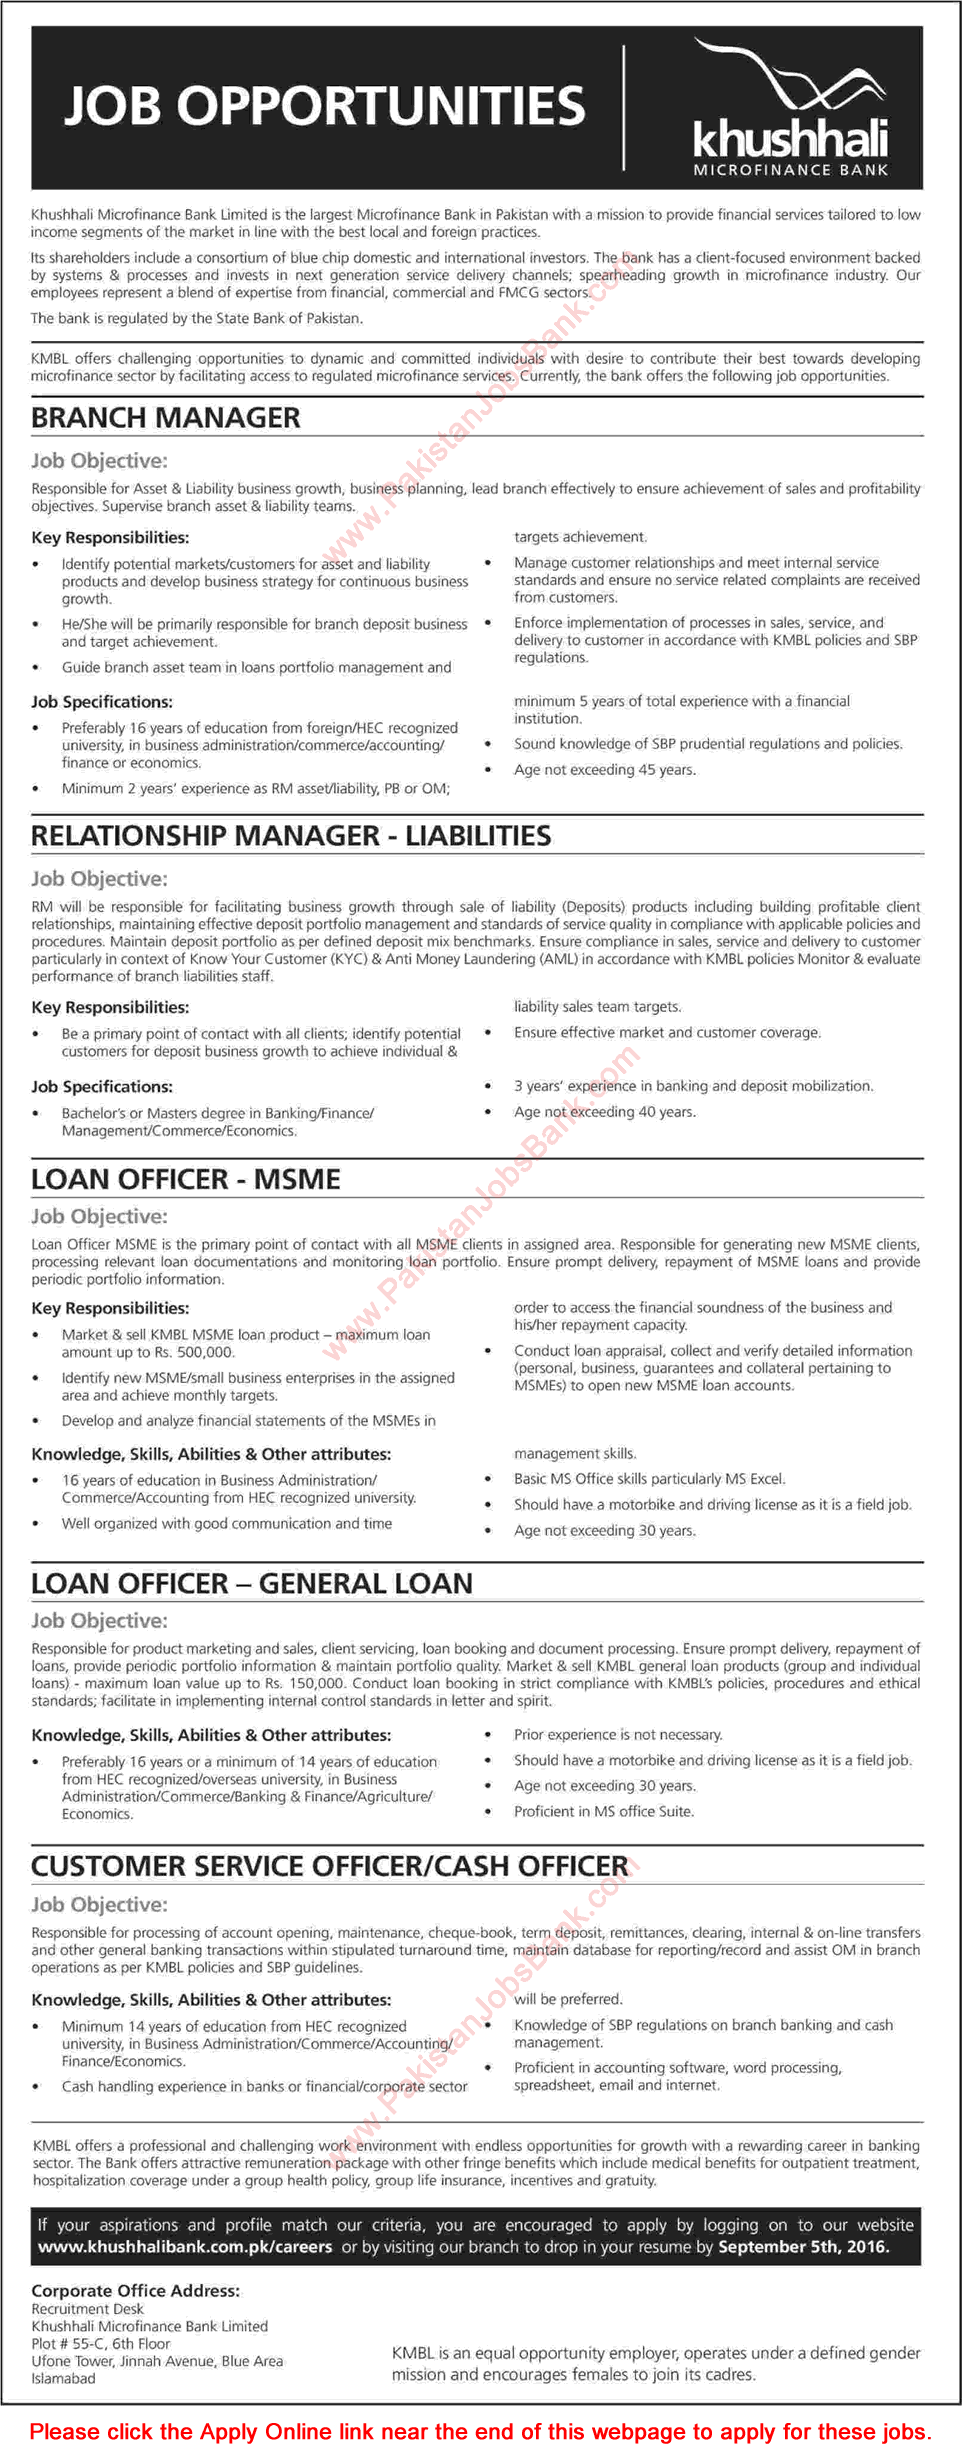 Khushhali Bank Jobs August 2016 Apply Online Cash / Loan Officers, Branch & Operation Managers Latest